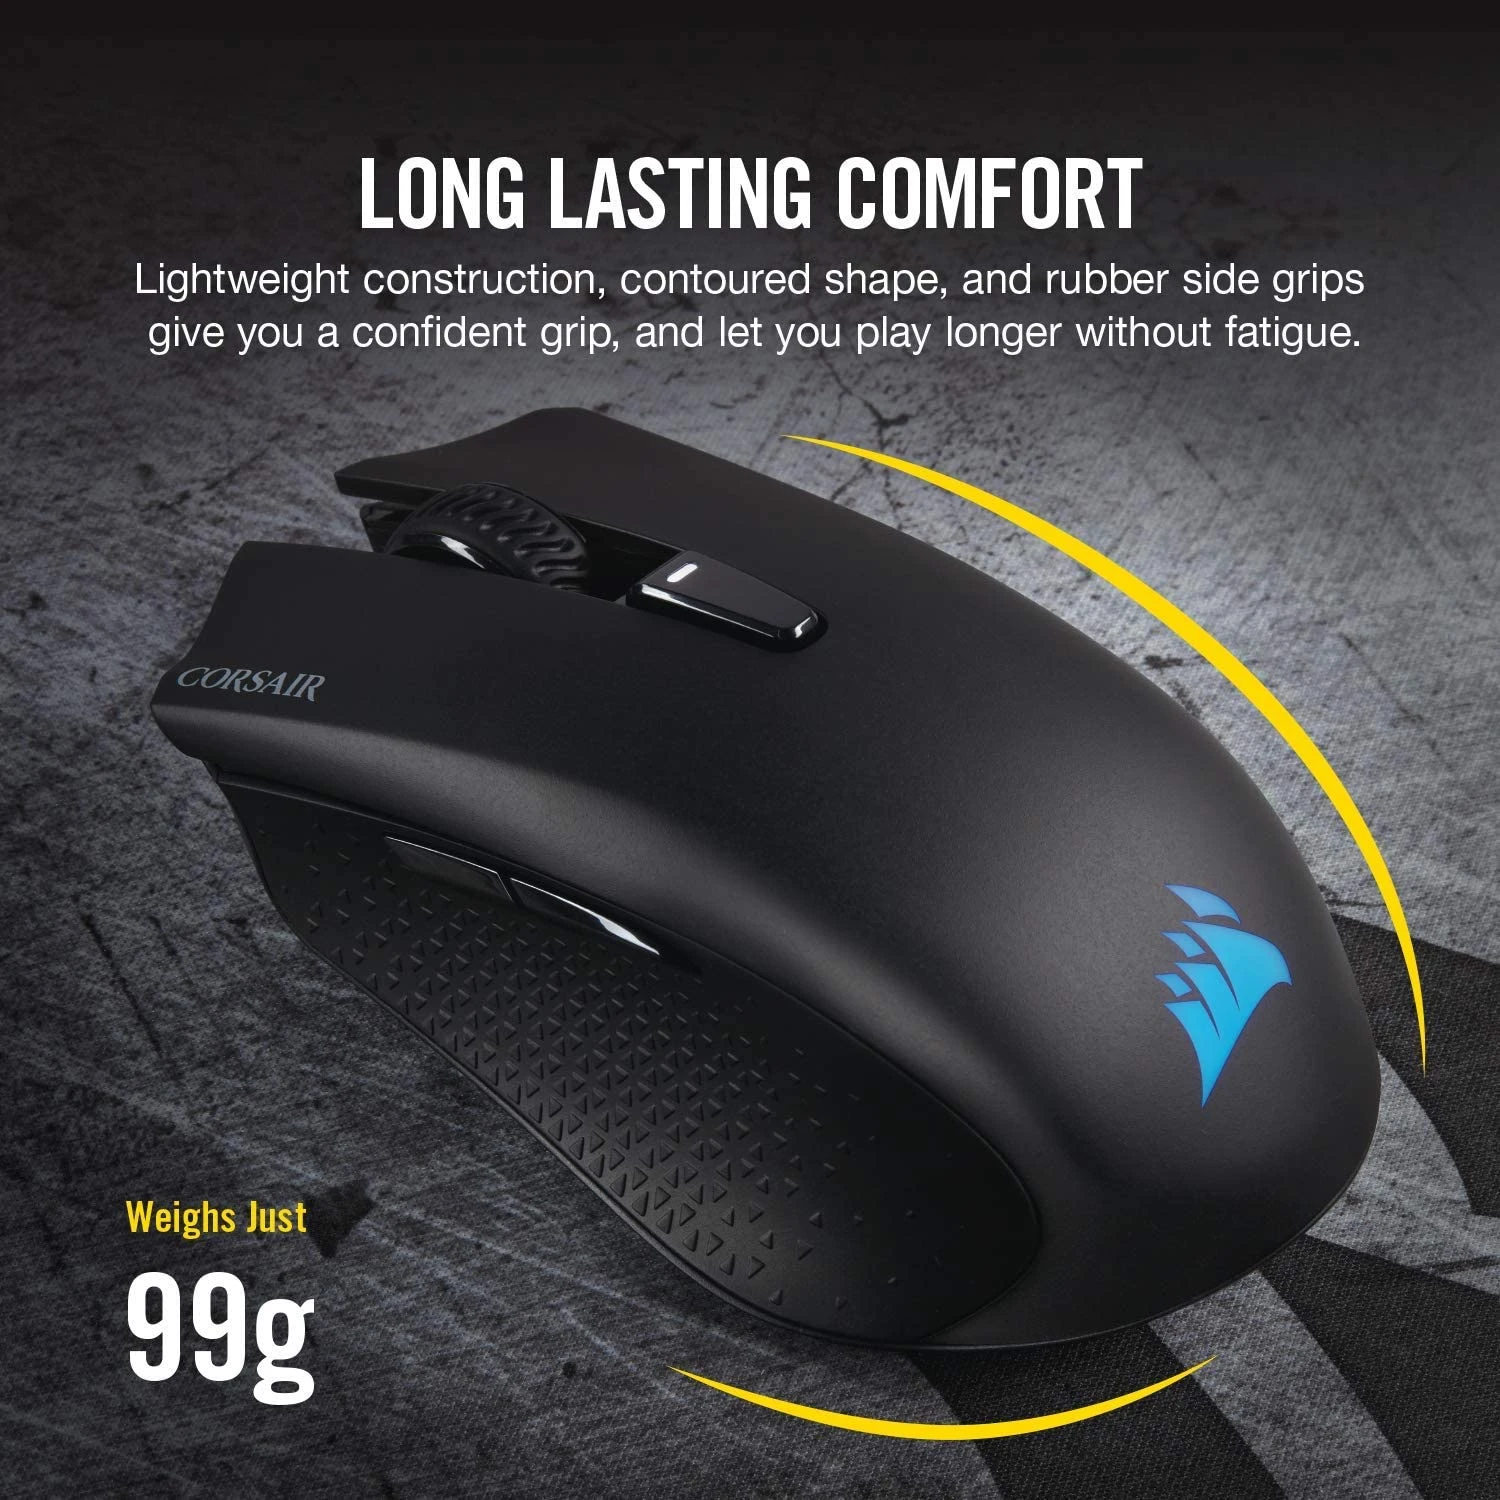 Corsair Rgb Wireless, Wireless Rechargeable Gaming Mouse With Slipstream Technology, Black, Backlit Rgb - Mouse - AliExpress